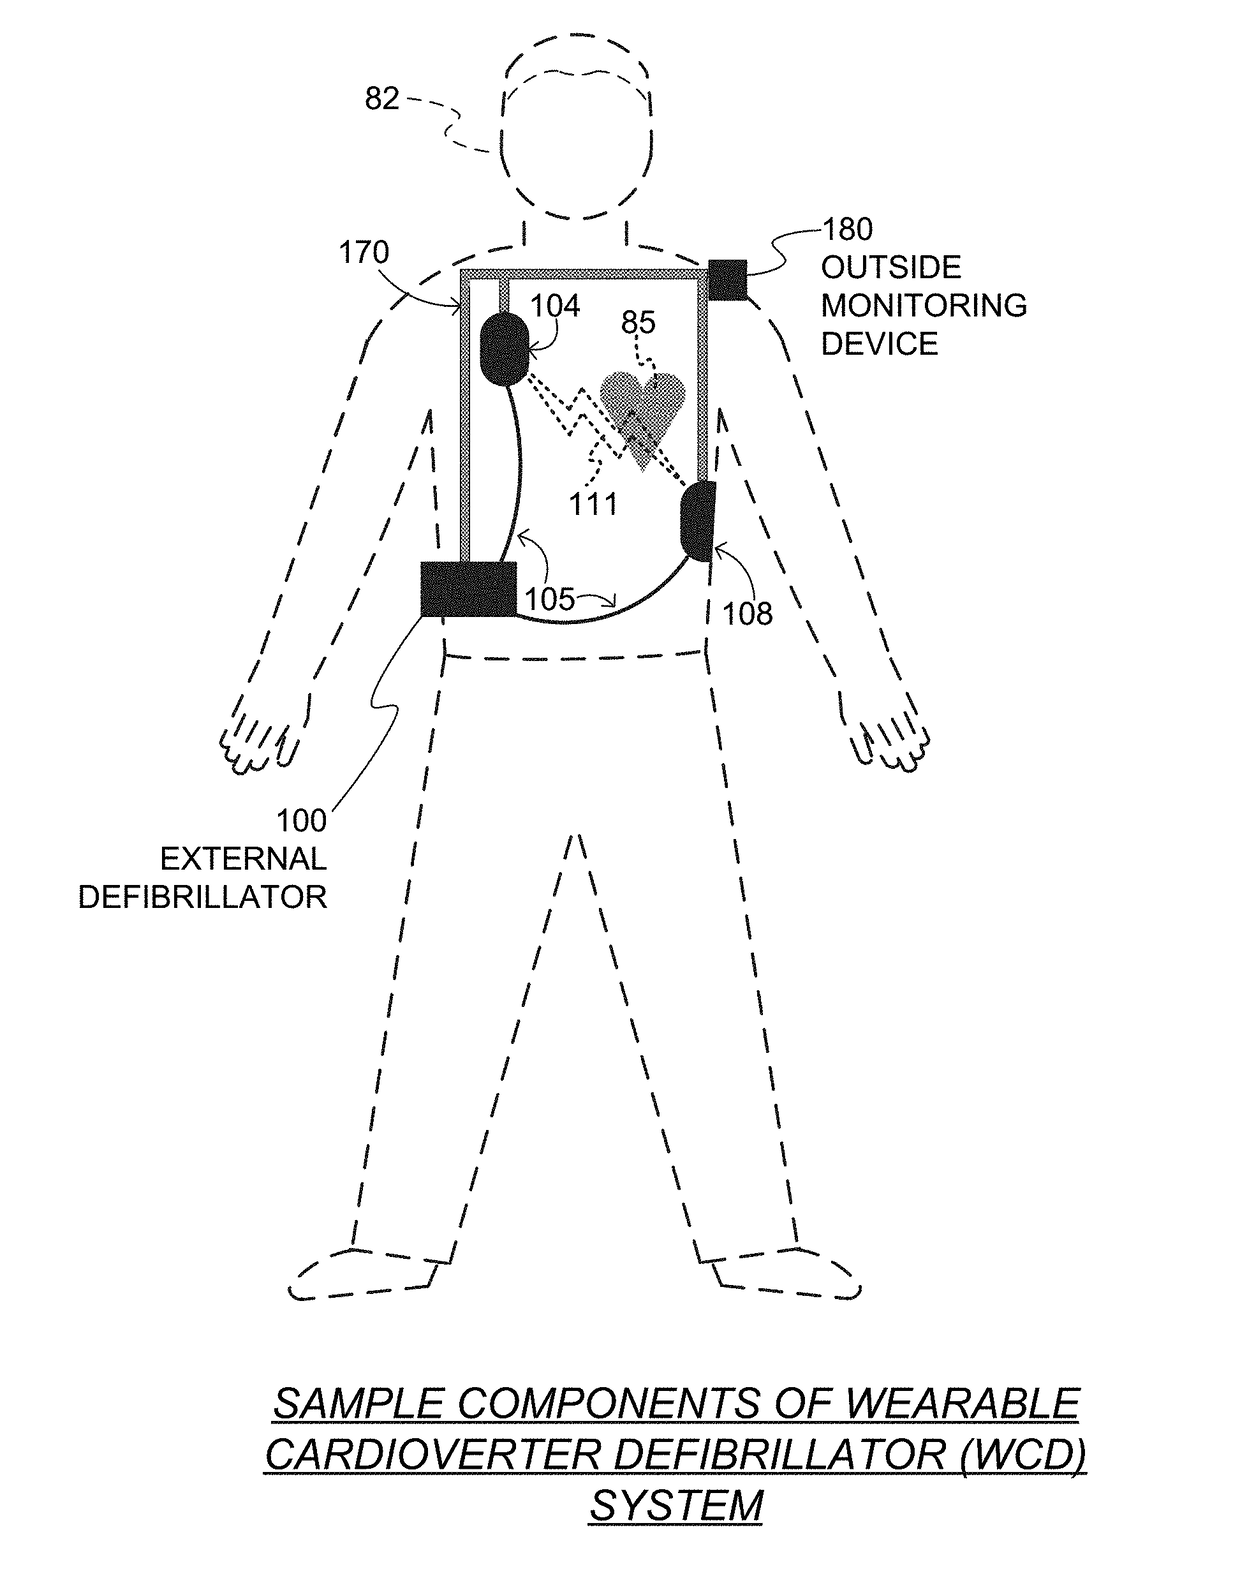 Wearable cardioverter defibrillator (WCD) system computing patient heart rate by multiplying ECG signals from different channels